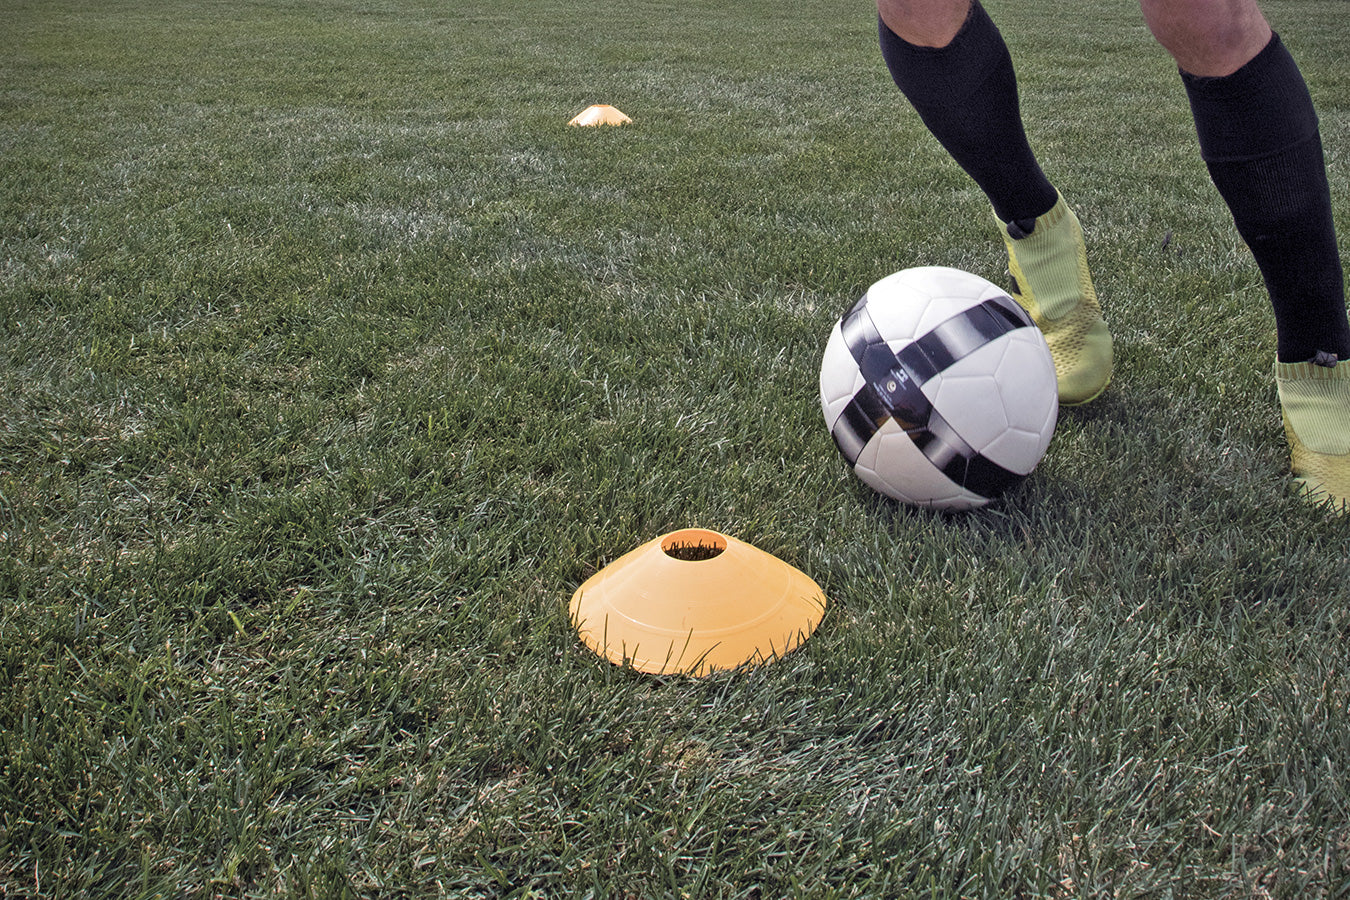 Kwik Goal Small Disc Cones - Pack of 25 (On Field)